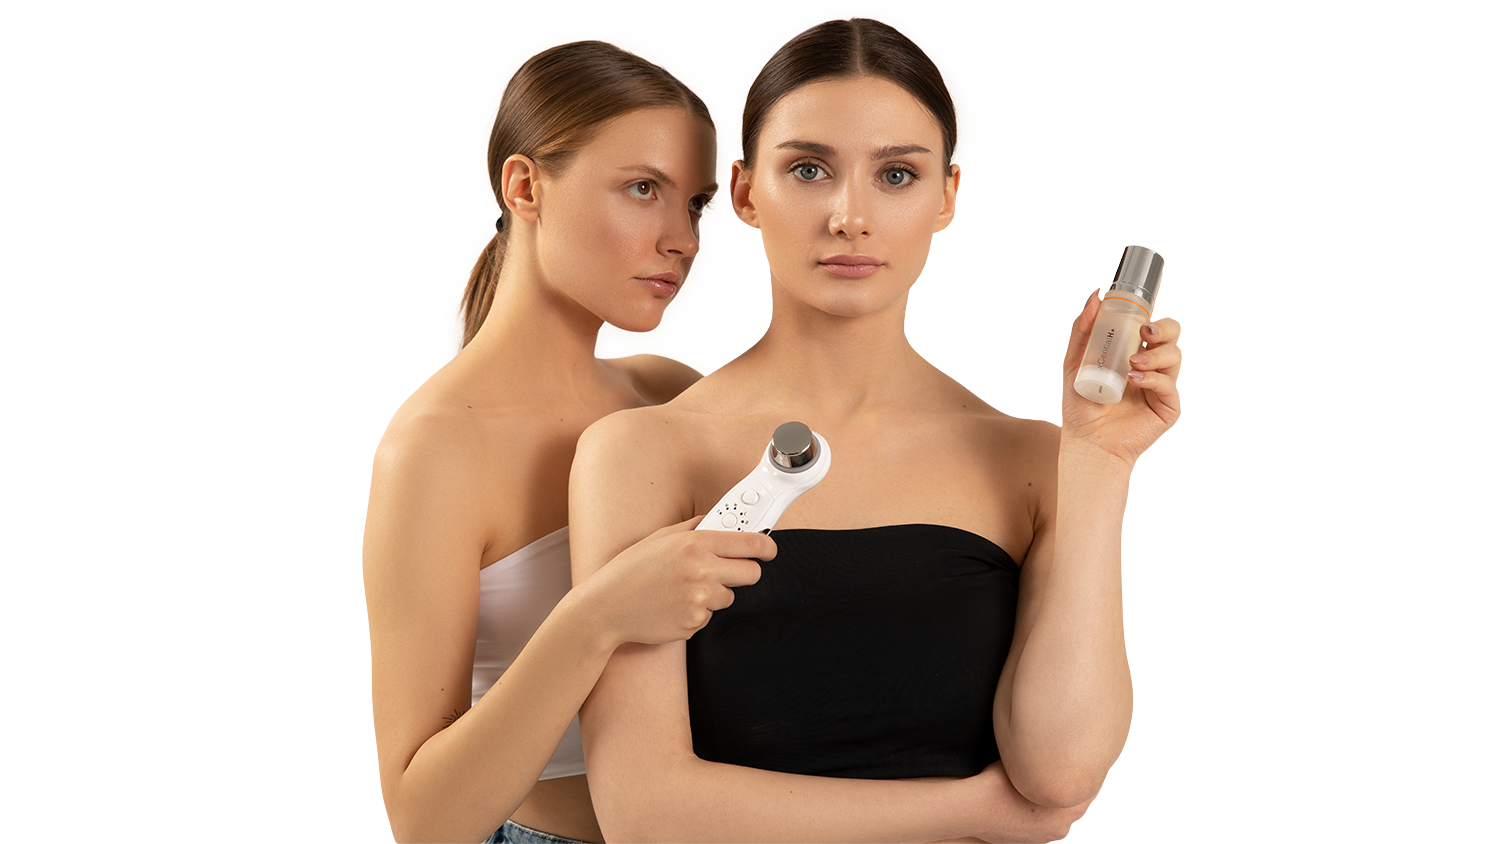 Models demonstrating SQOOM, holding a skincare device and a bottle of vegan hyaluronic acid anti-aging serum.